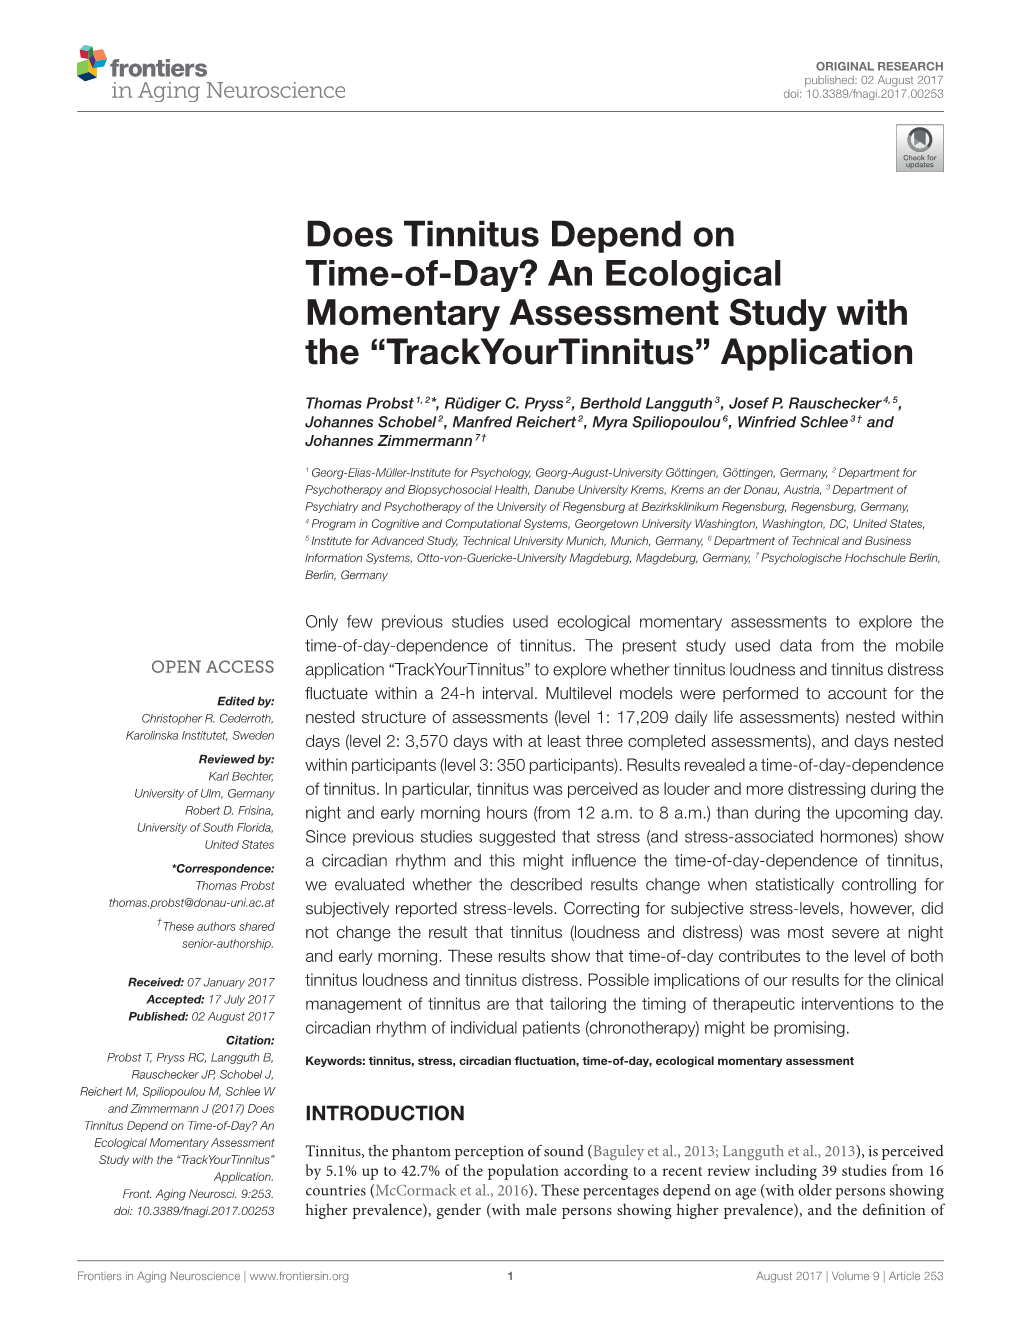 Does Tinnitus Depend on Time-Of-Day? an Ecological Momentary Assessment Study with the “Trackyourtinnitus” Application